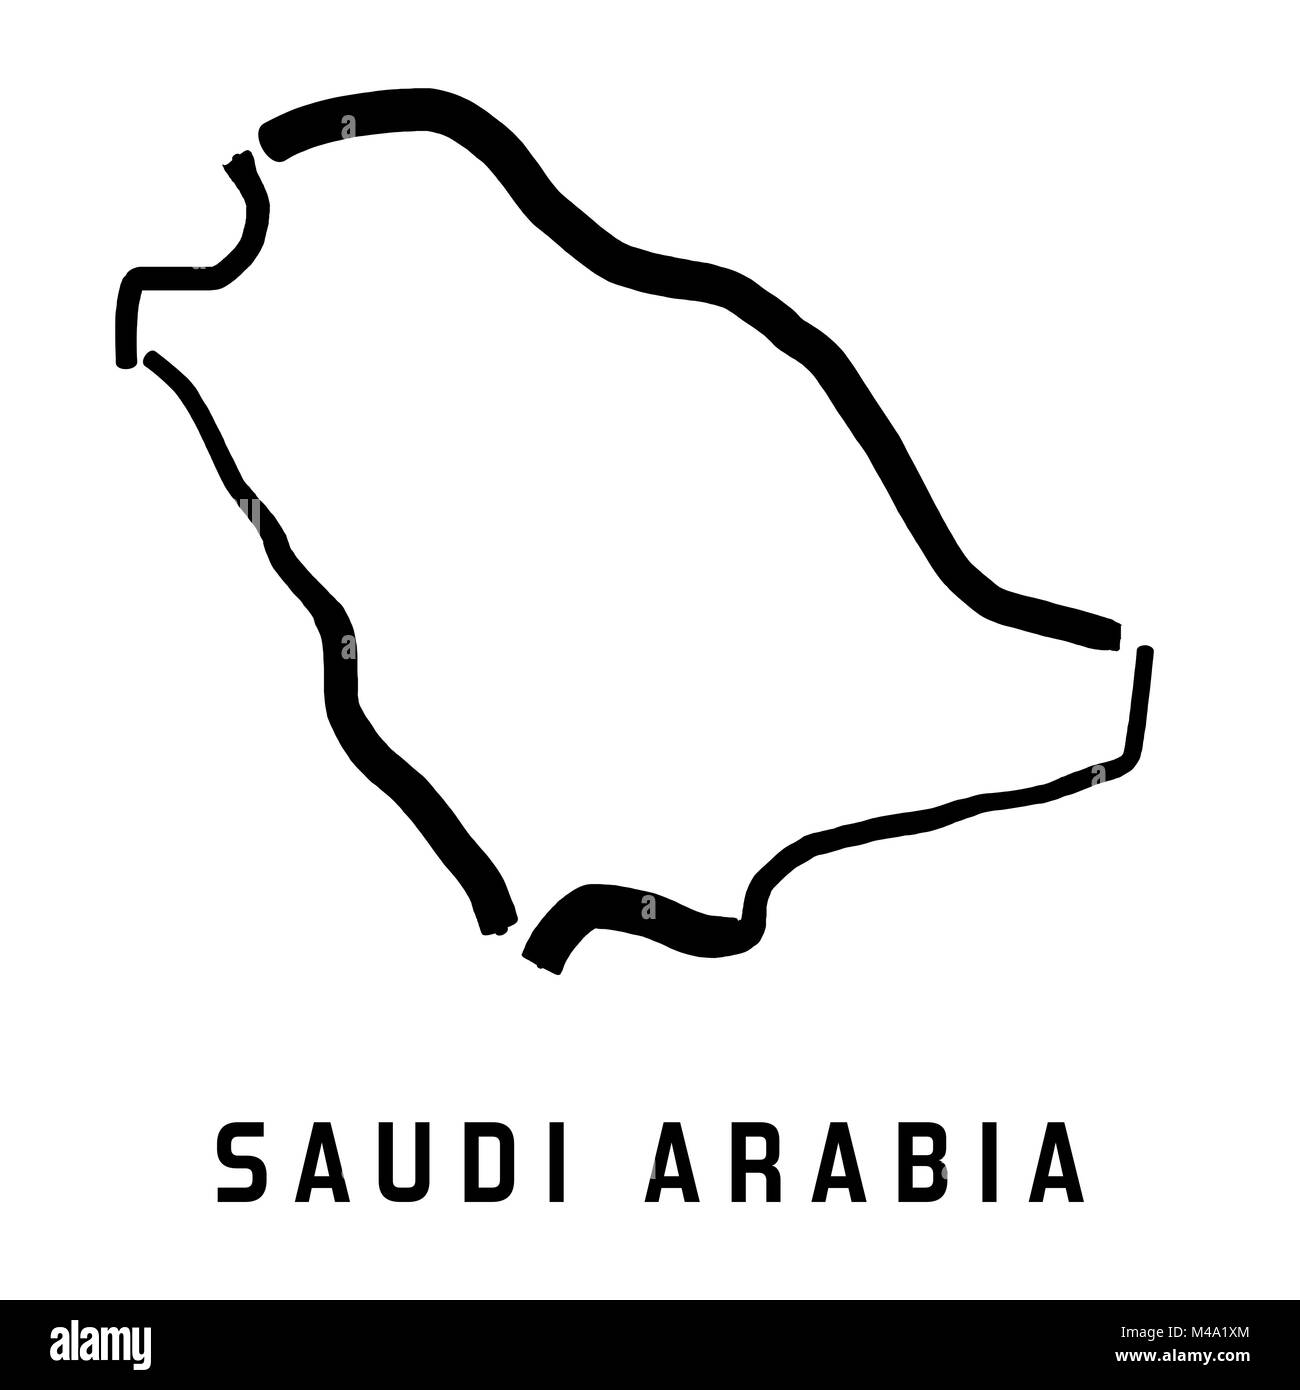 Saudi Arabia simple map outline - smooth simplified country shape map vector. Stock Vector